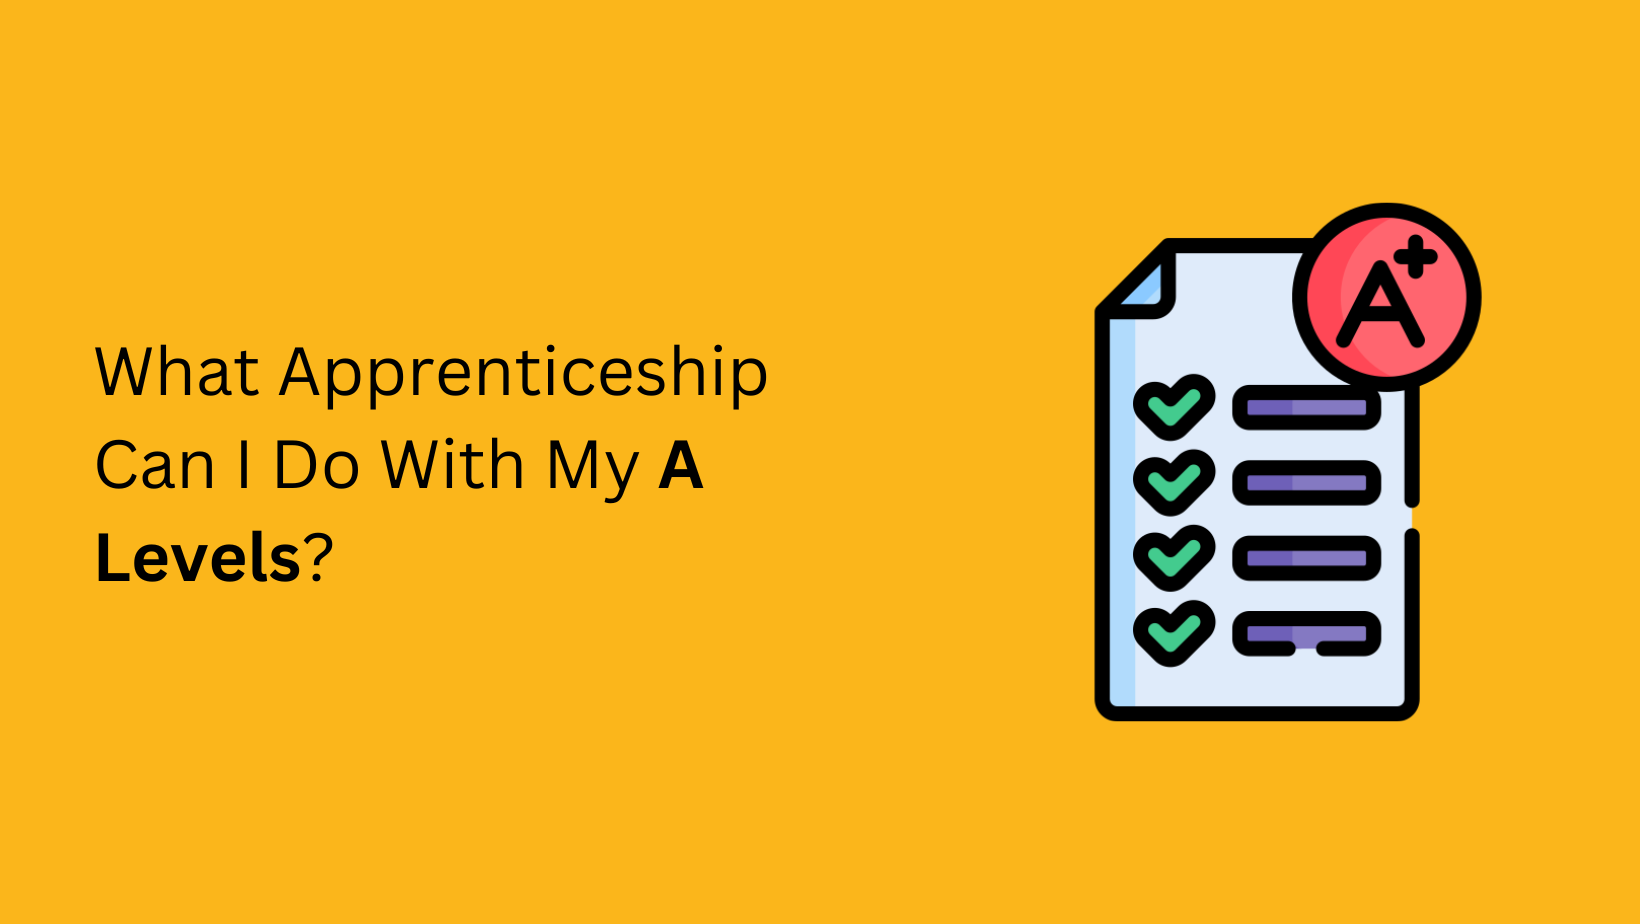 What Apprenticeships Can I Do With My A Levels